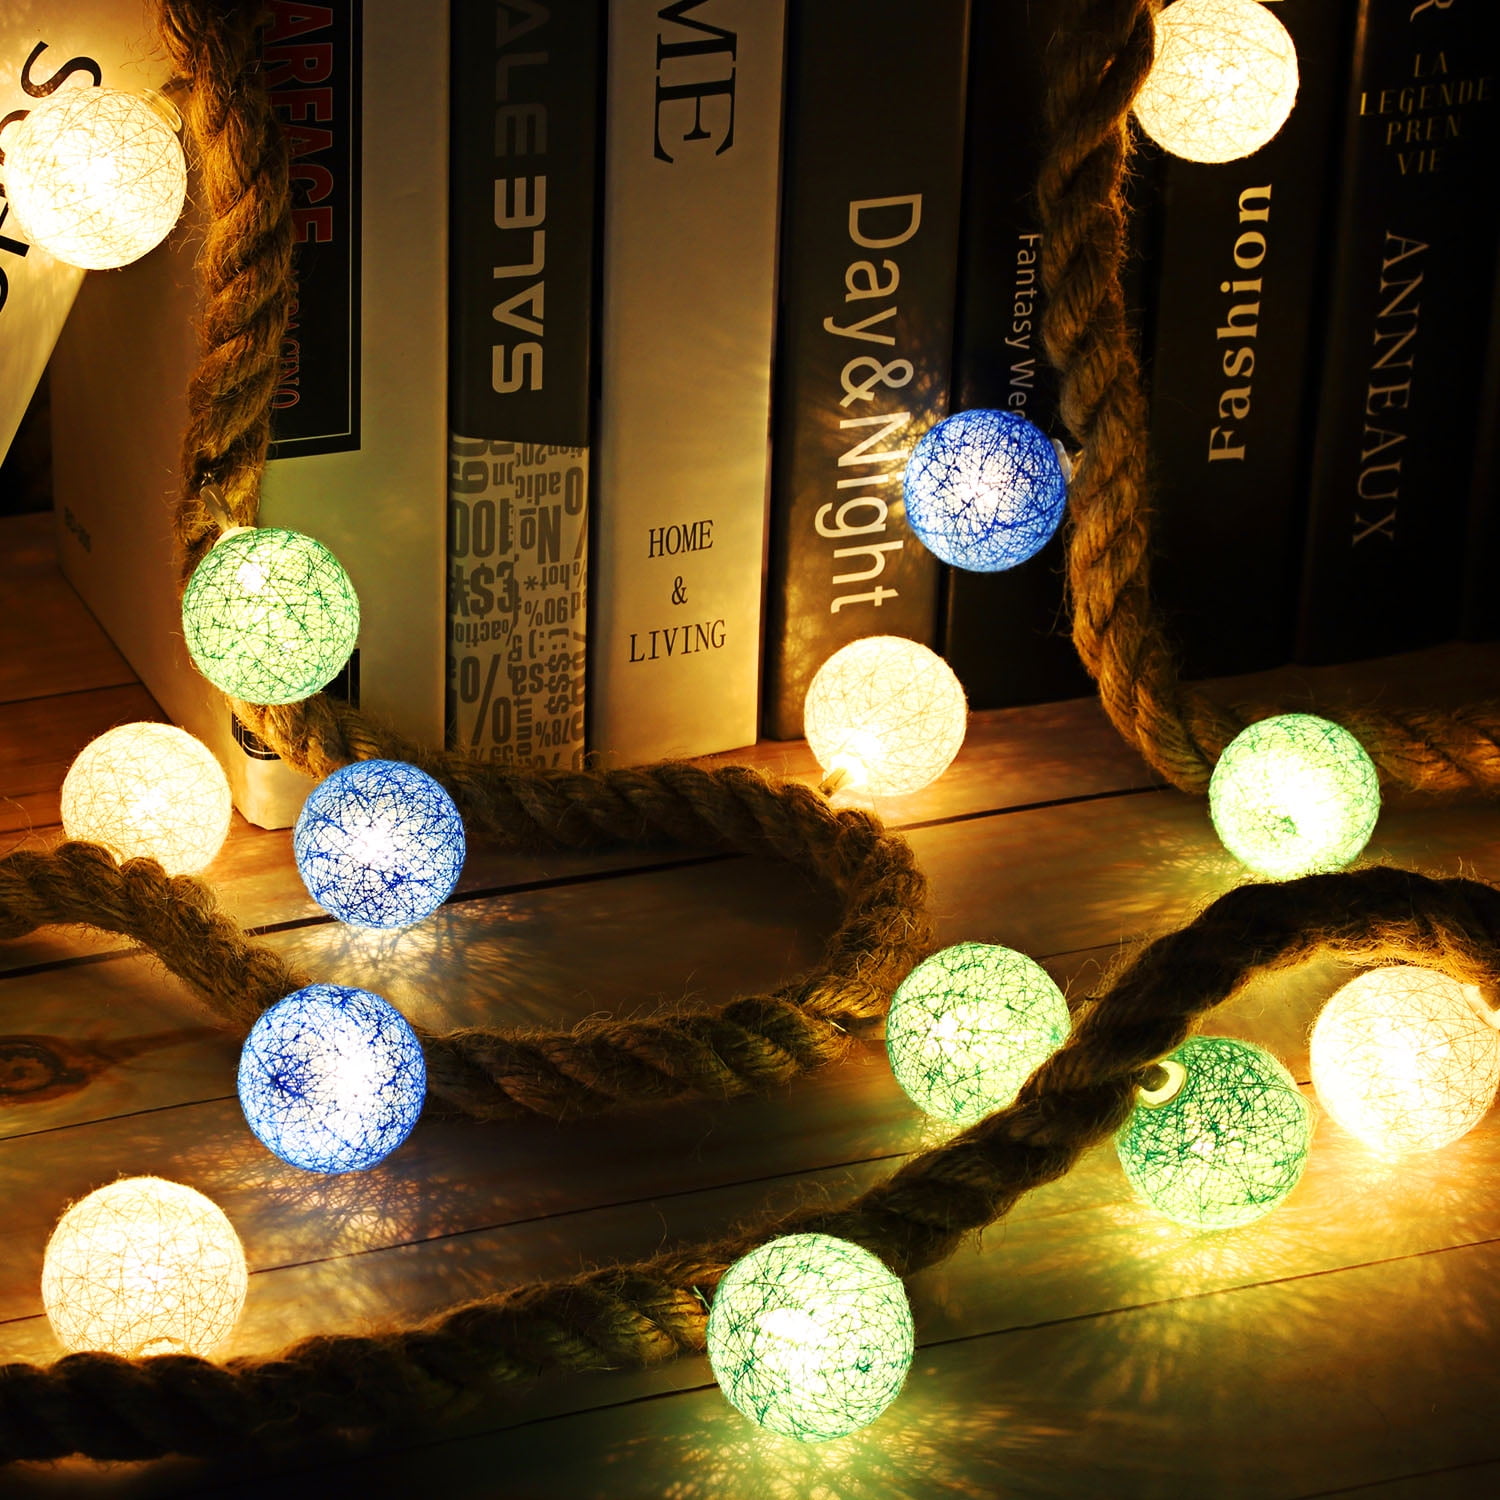 show original title Details about   LED Light Chain Battery JANKA Rattan Ball 30 LED Colorful RGB Remote Control Ball 